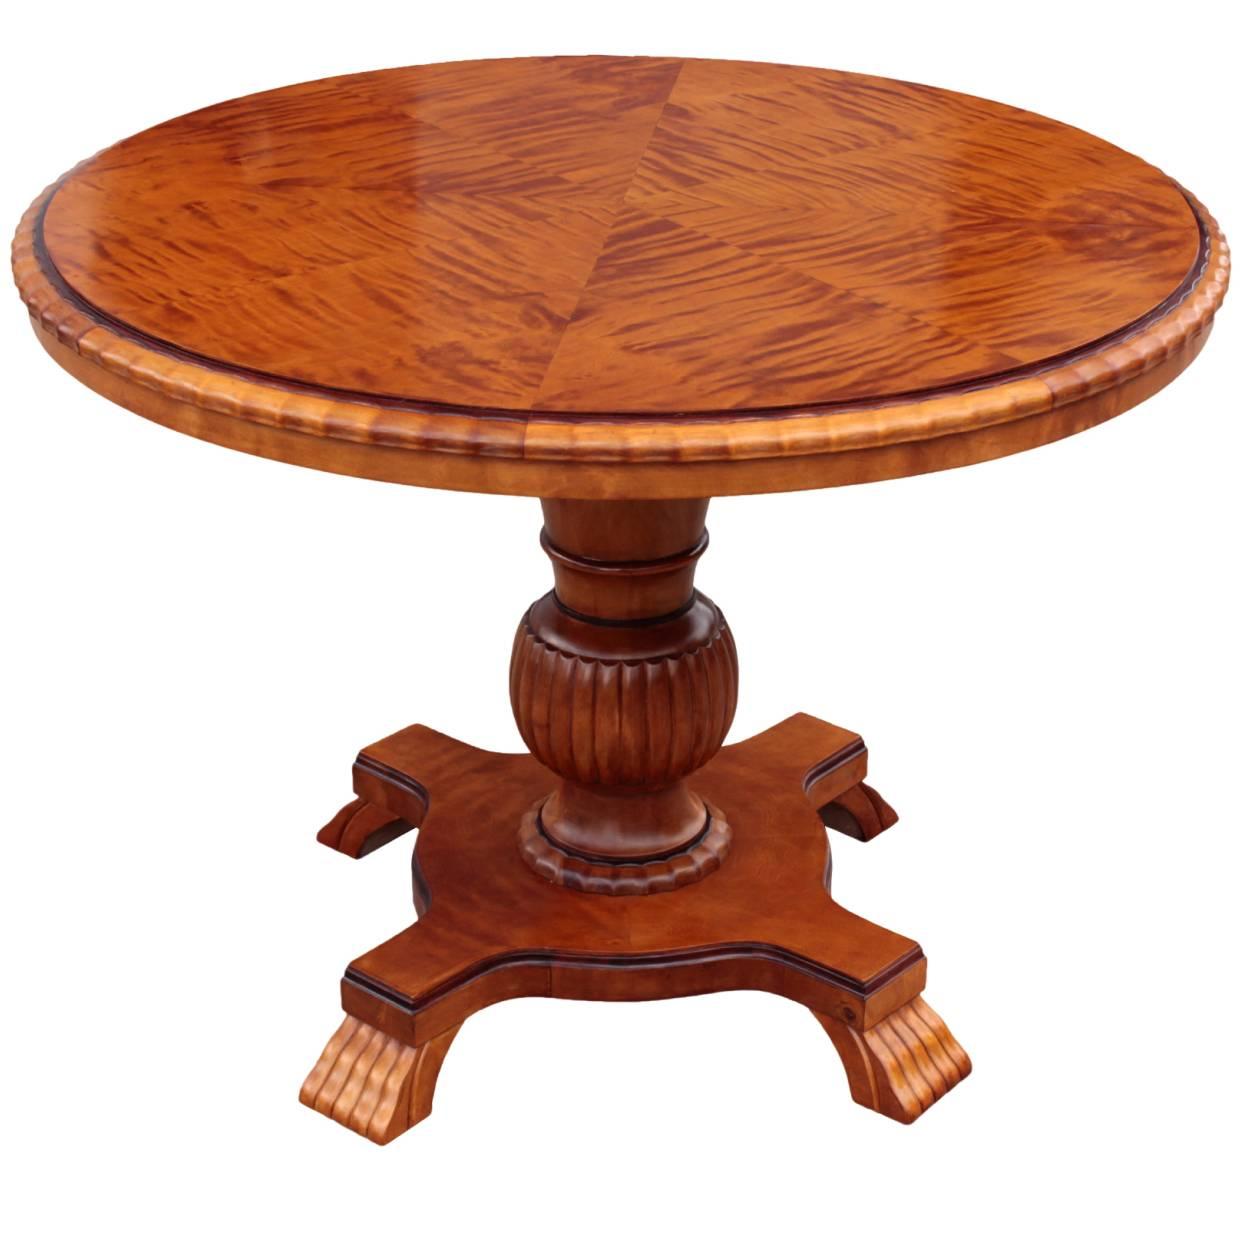 Swedish Art Deco Period Round Cocktail or Coffee Pedestal Table For Sale